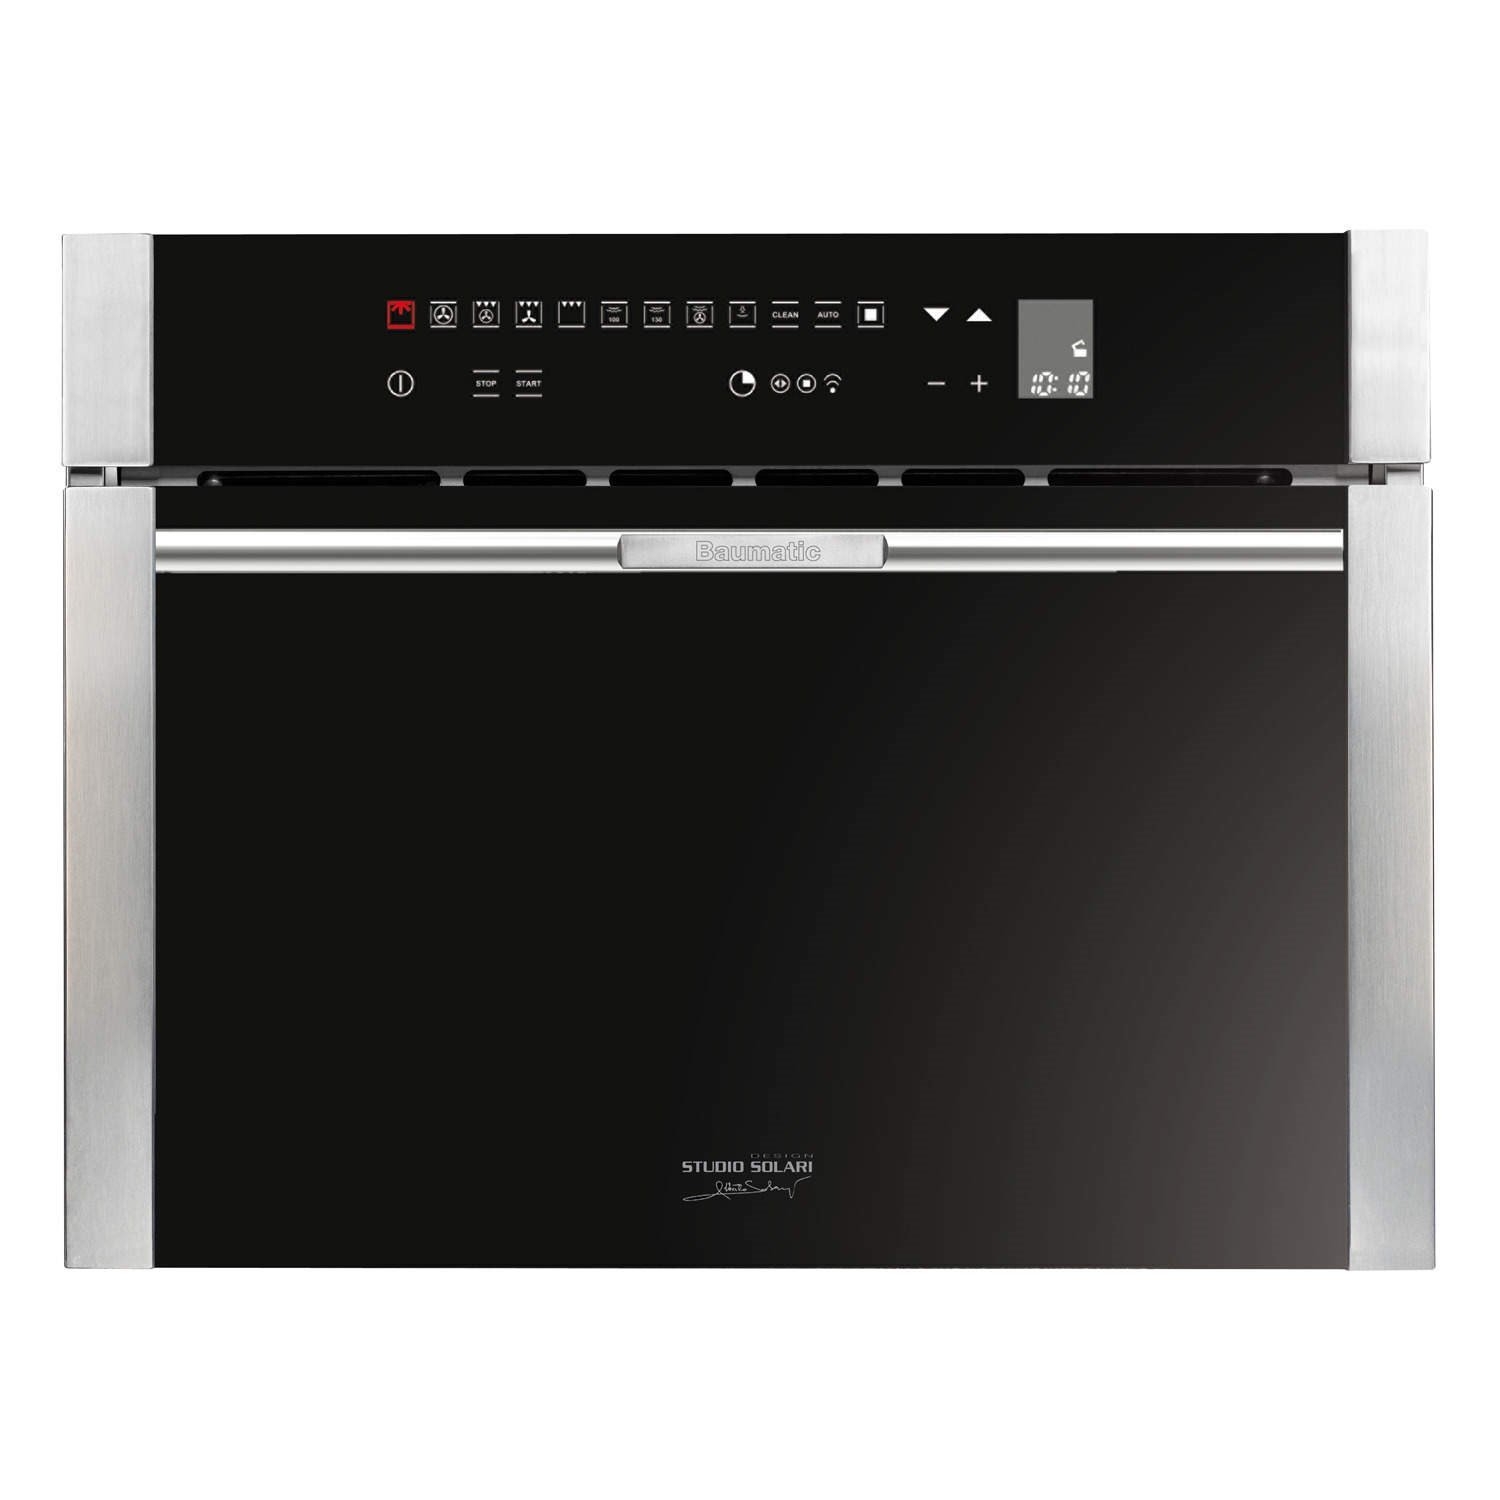 Baumatic Premium-Line BCS455TS 46cm Compact Steam Oven Black & Stainless Steel